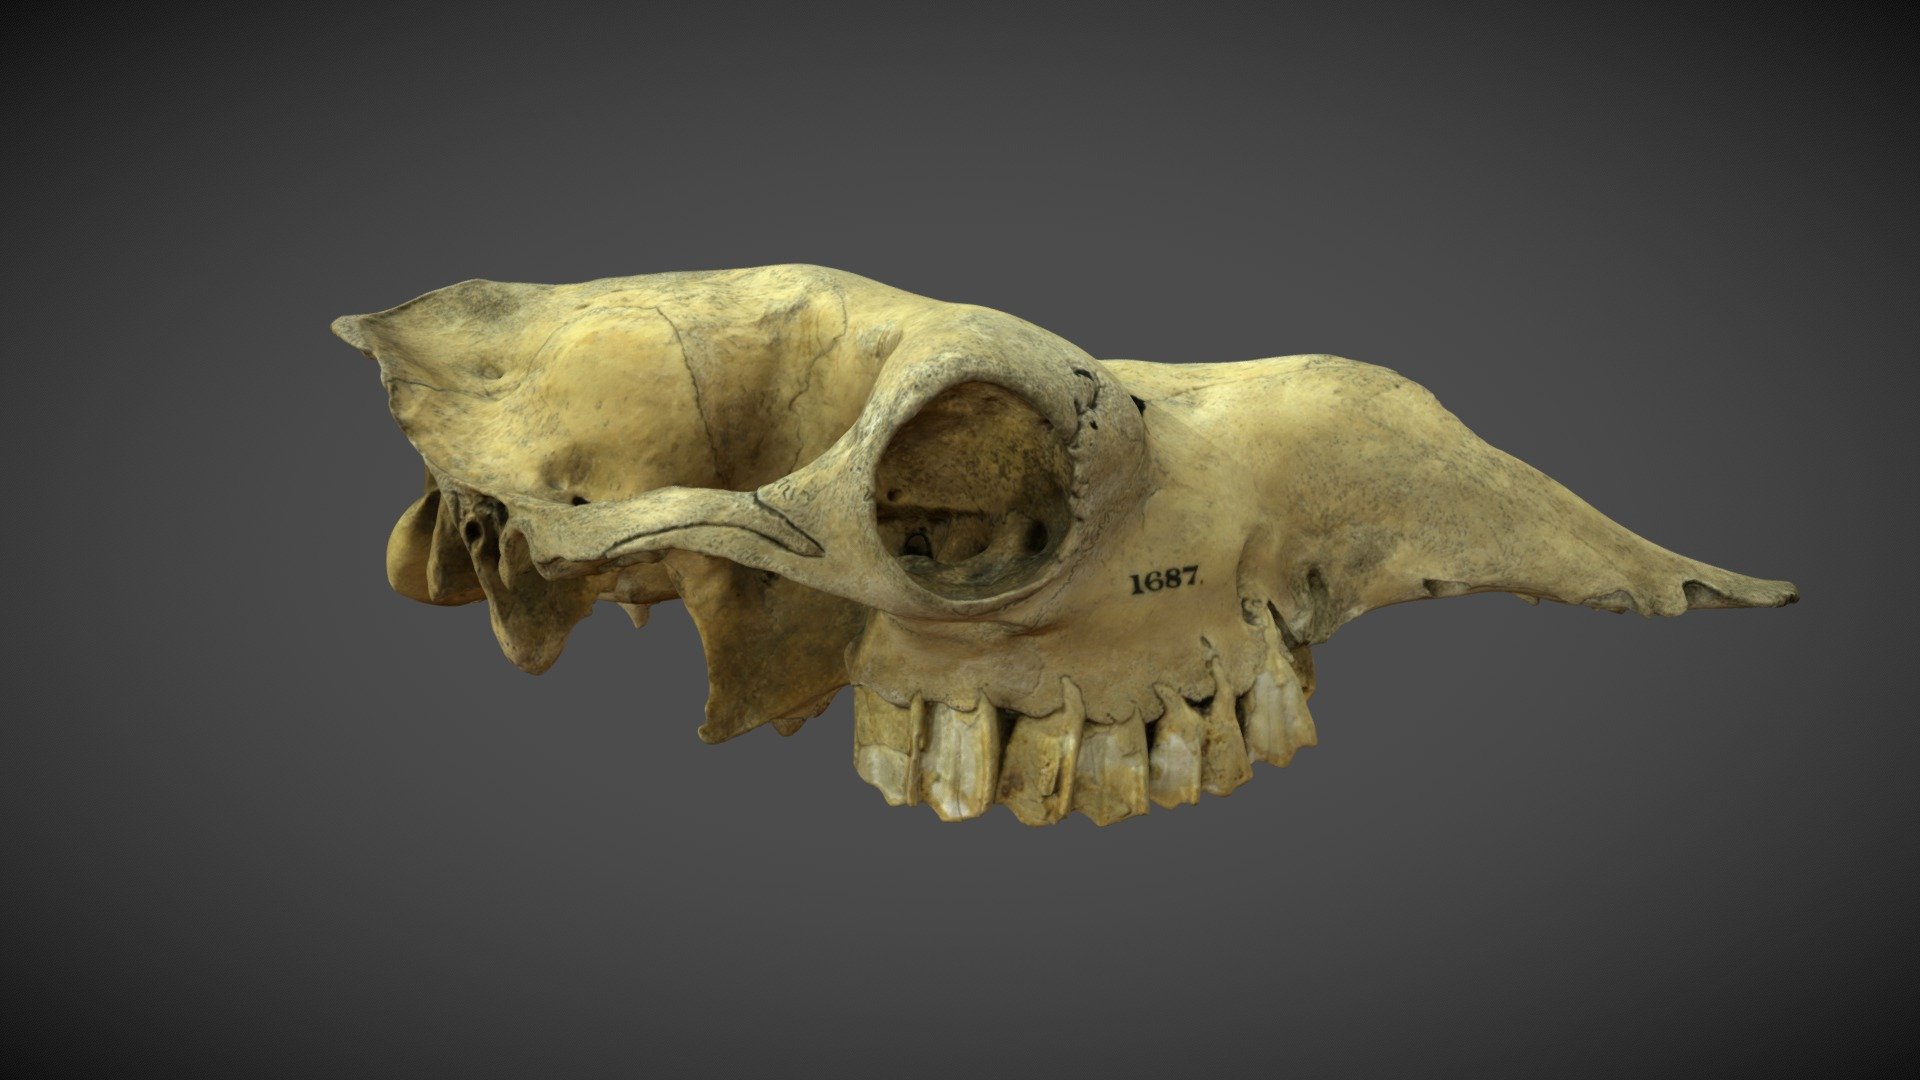 From the collection of the Royal College of Surgeons of England

Scanned by S Dey, ThinkSee3D 11/11/21 - Camel Skull - 3D model by ThinkSee3D 3d model